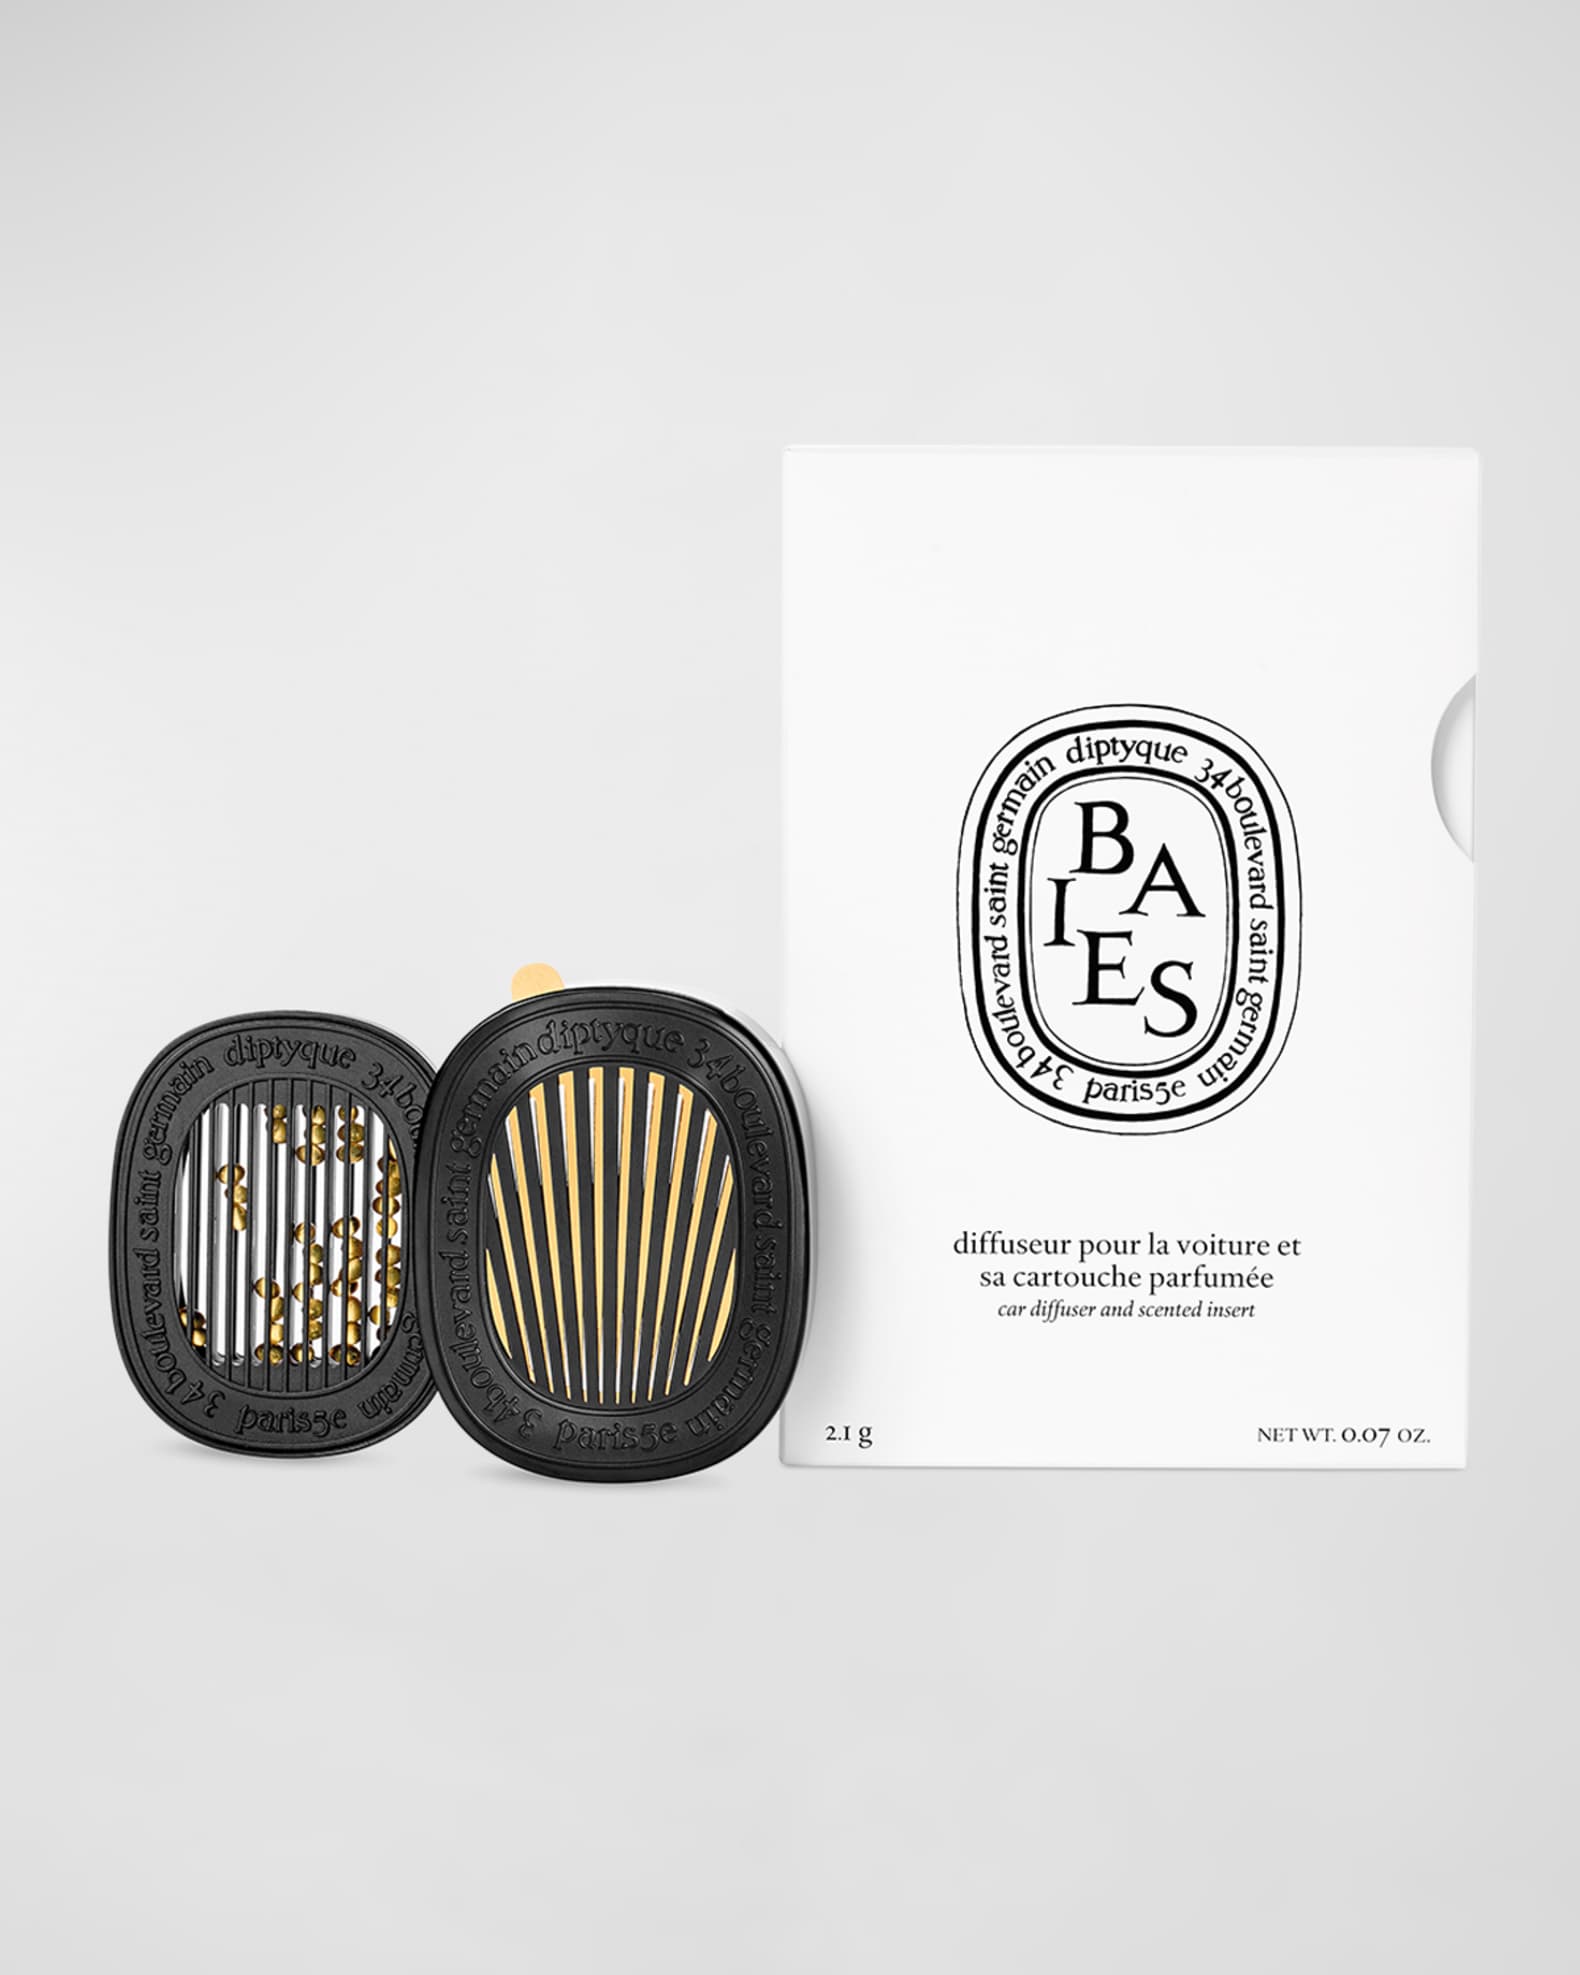 DIPTYQUE Baies (Berries) Car Fragrance Diffuser and Refill Insert Set, 0.07  oz.